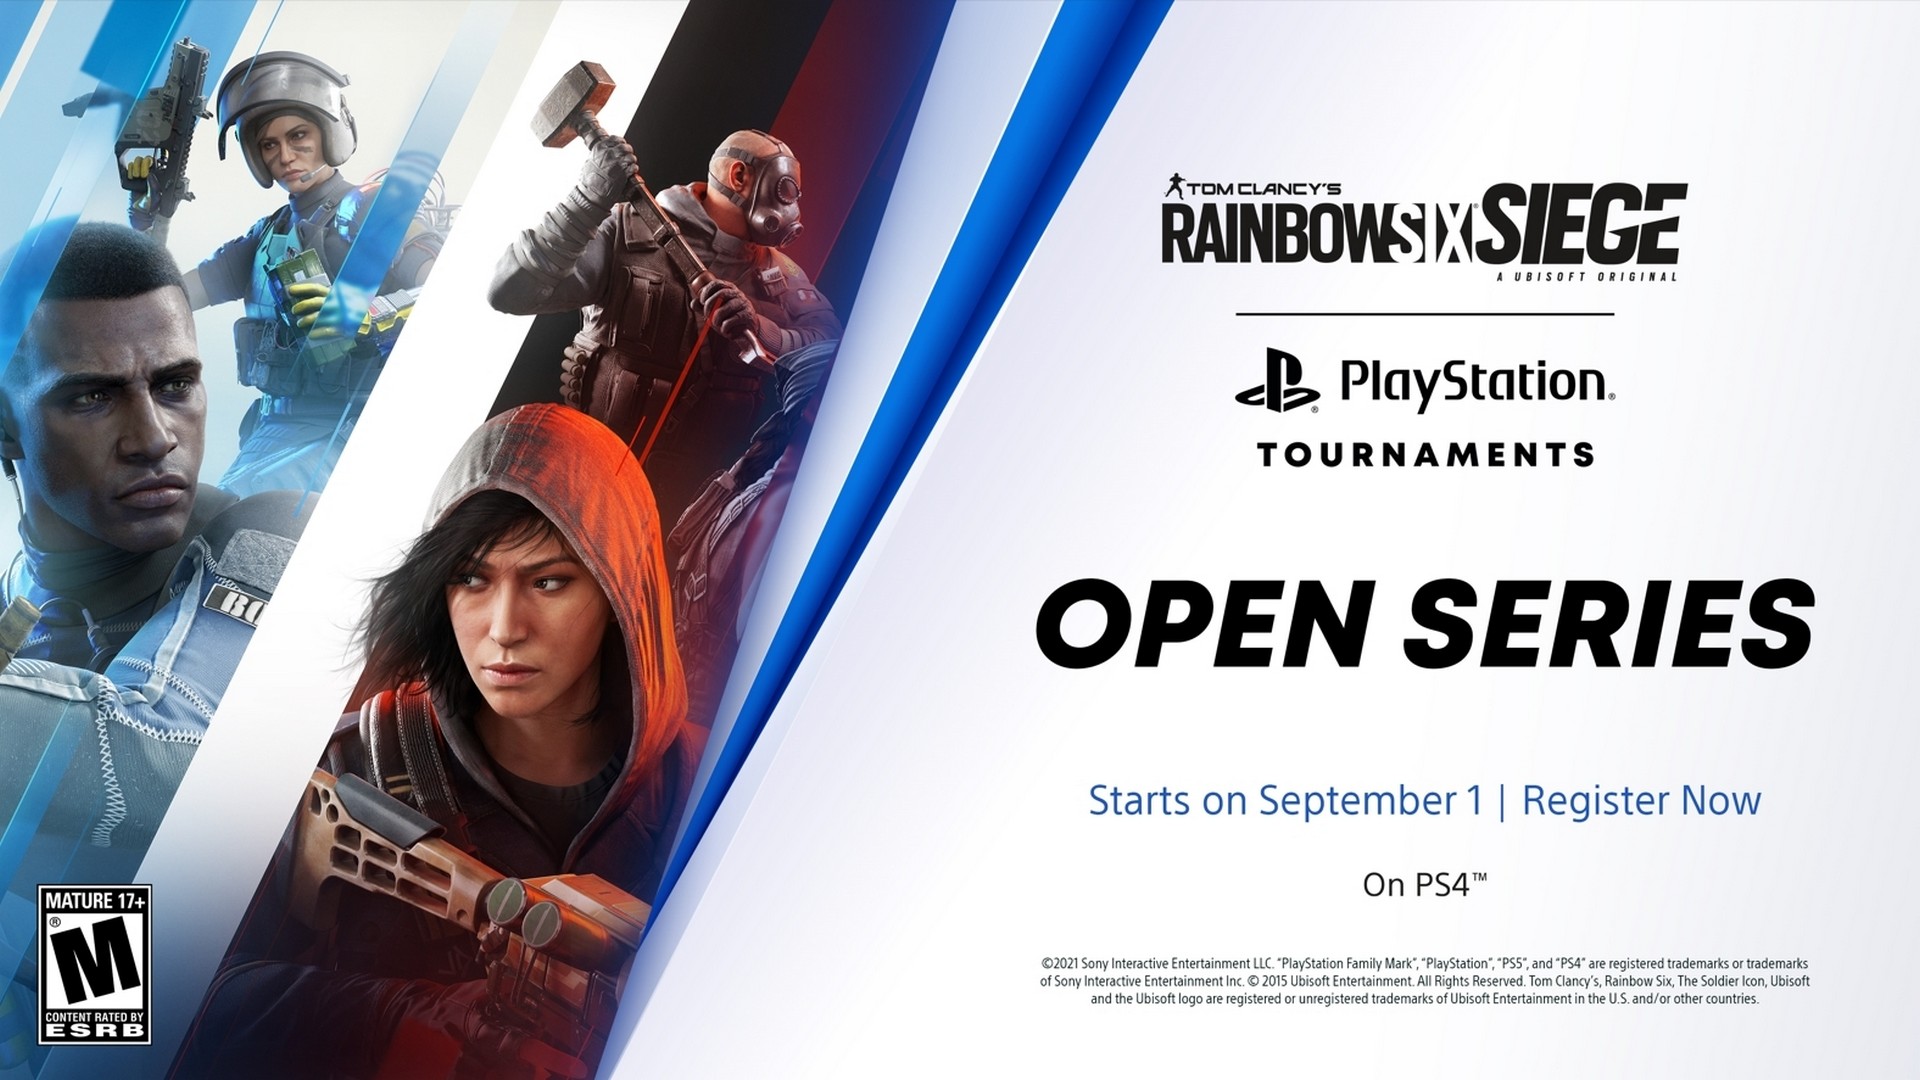 Tom Clancy’s Rainbow Six Siege Joins The PlayStation Tournaments Open Series